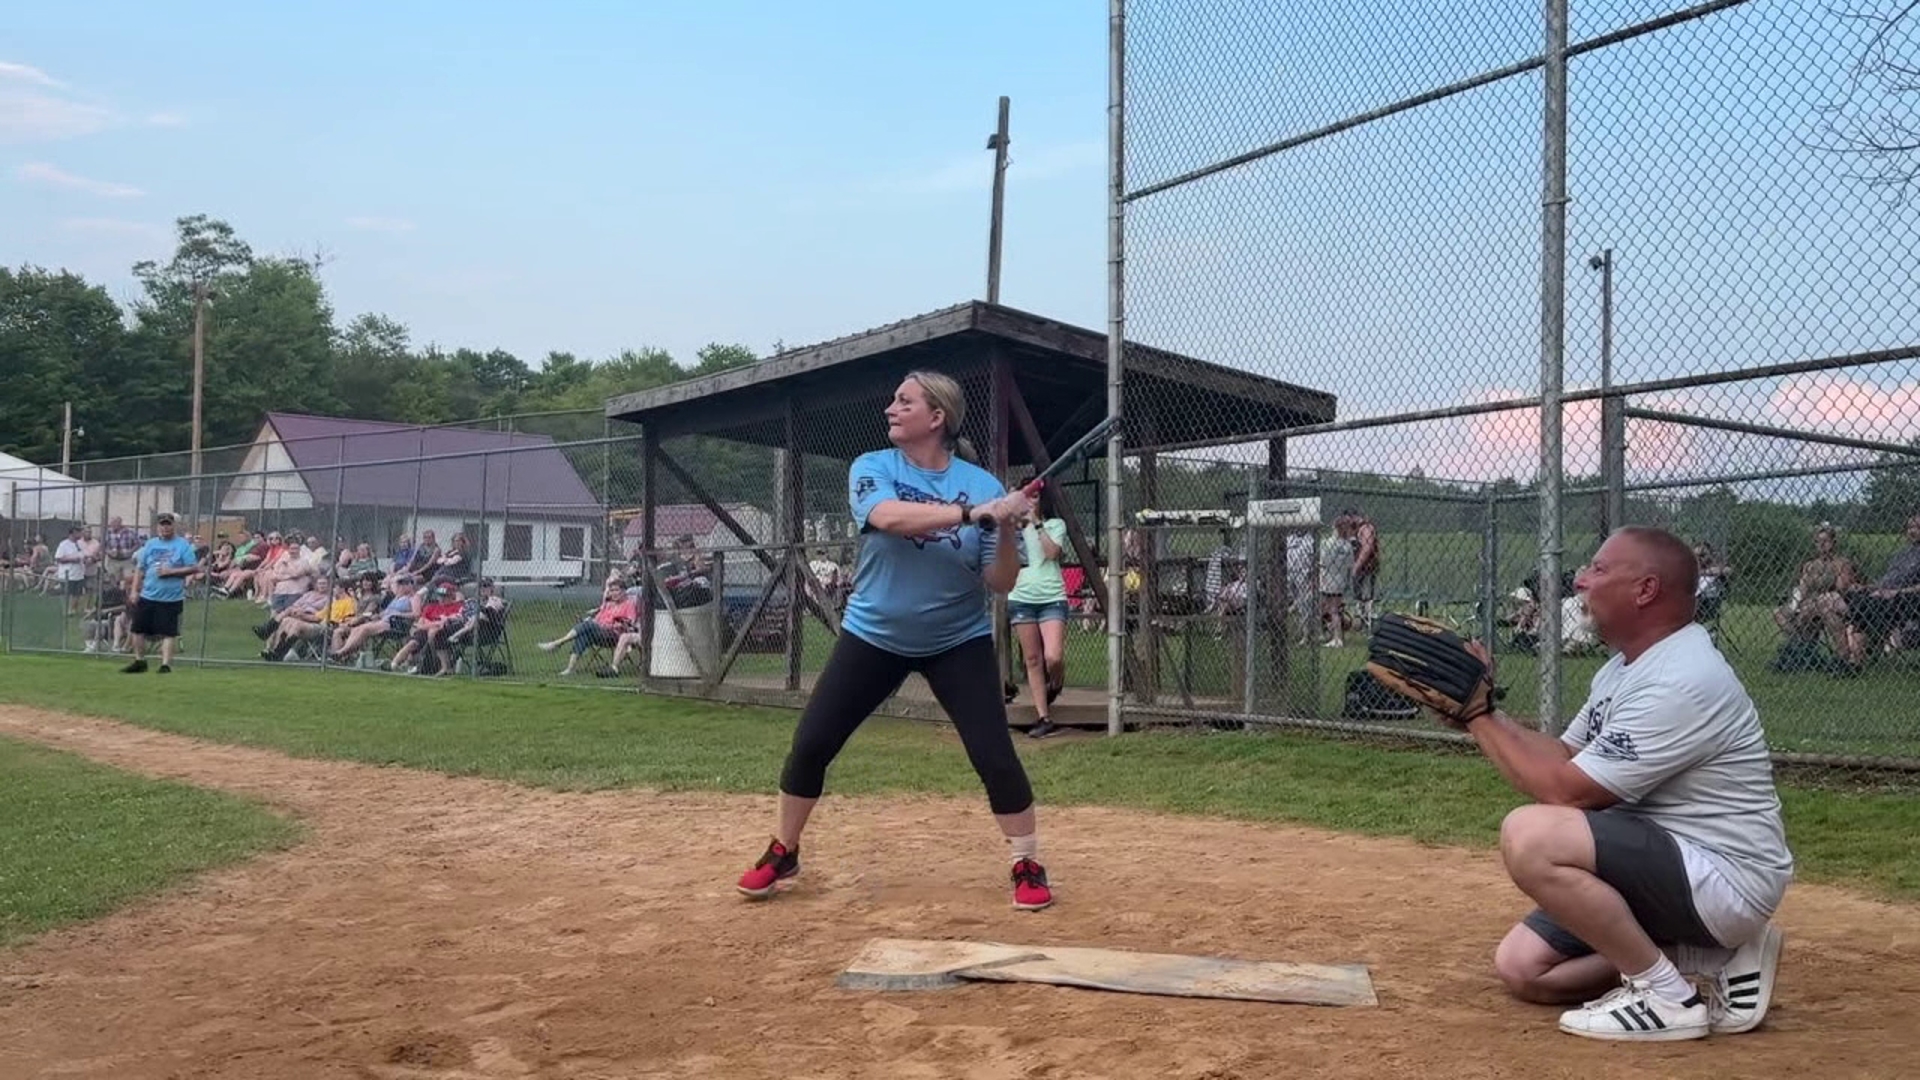 Members of the Newswatch 16 Team took part in the Waymart Homerdome Classic Softball Tournament in Waymart to raise money for a Little League field.